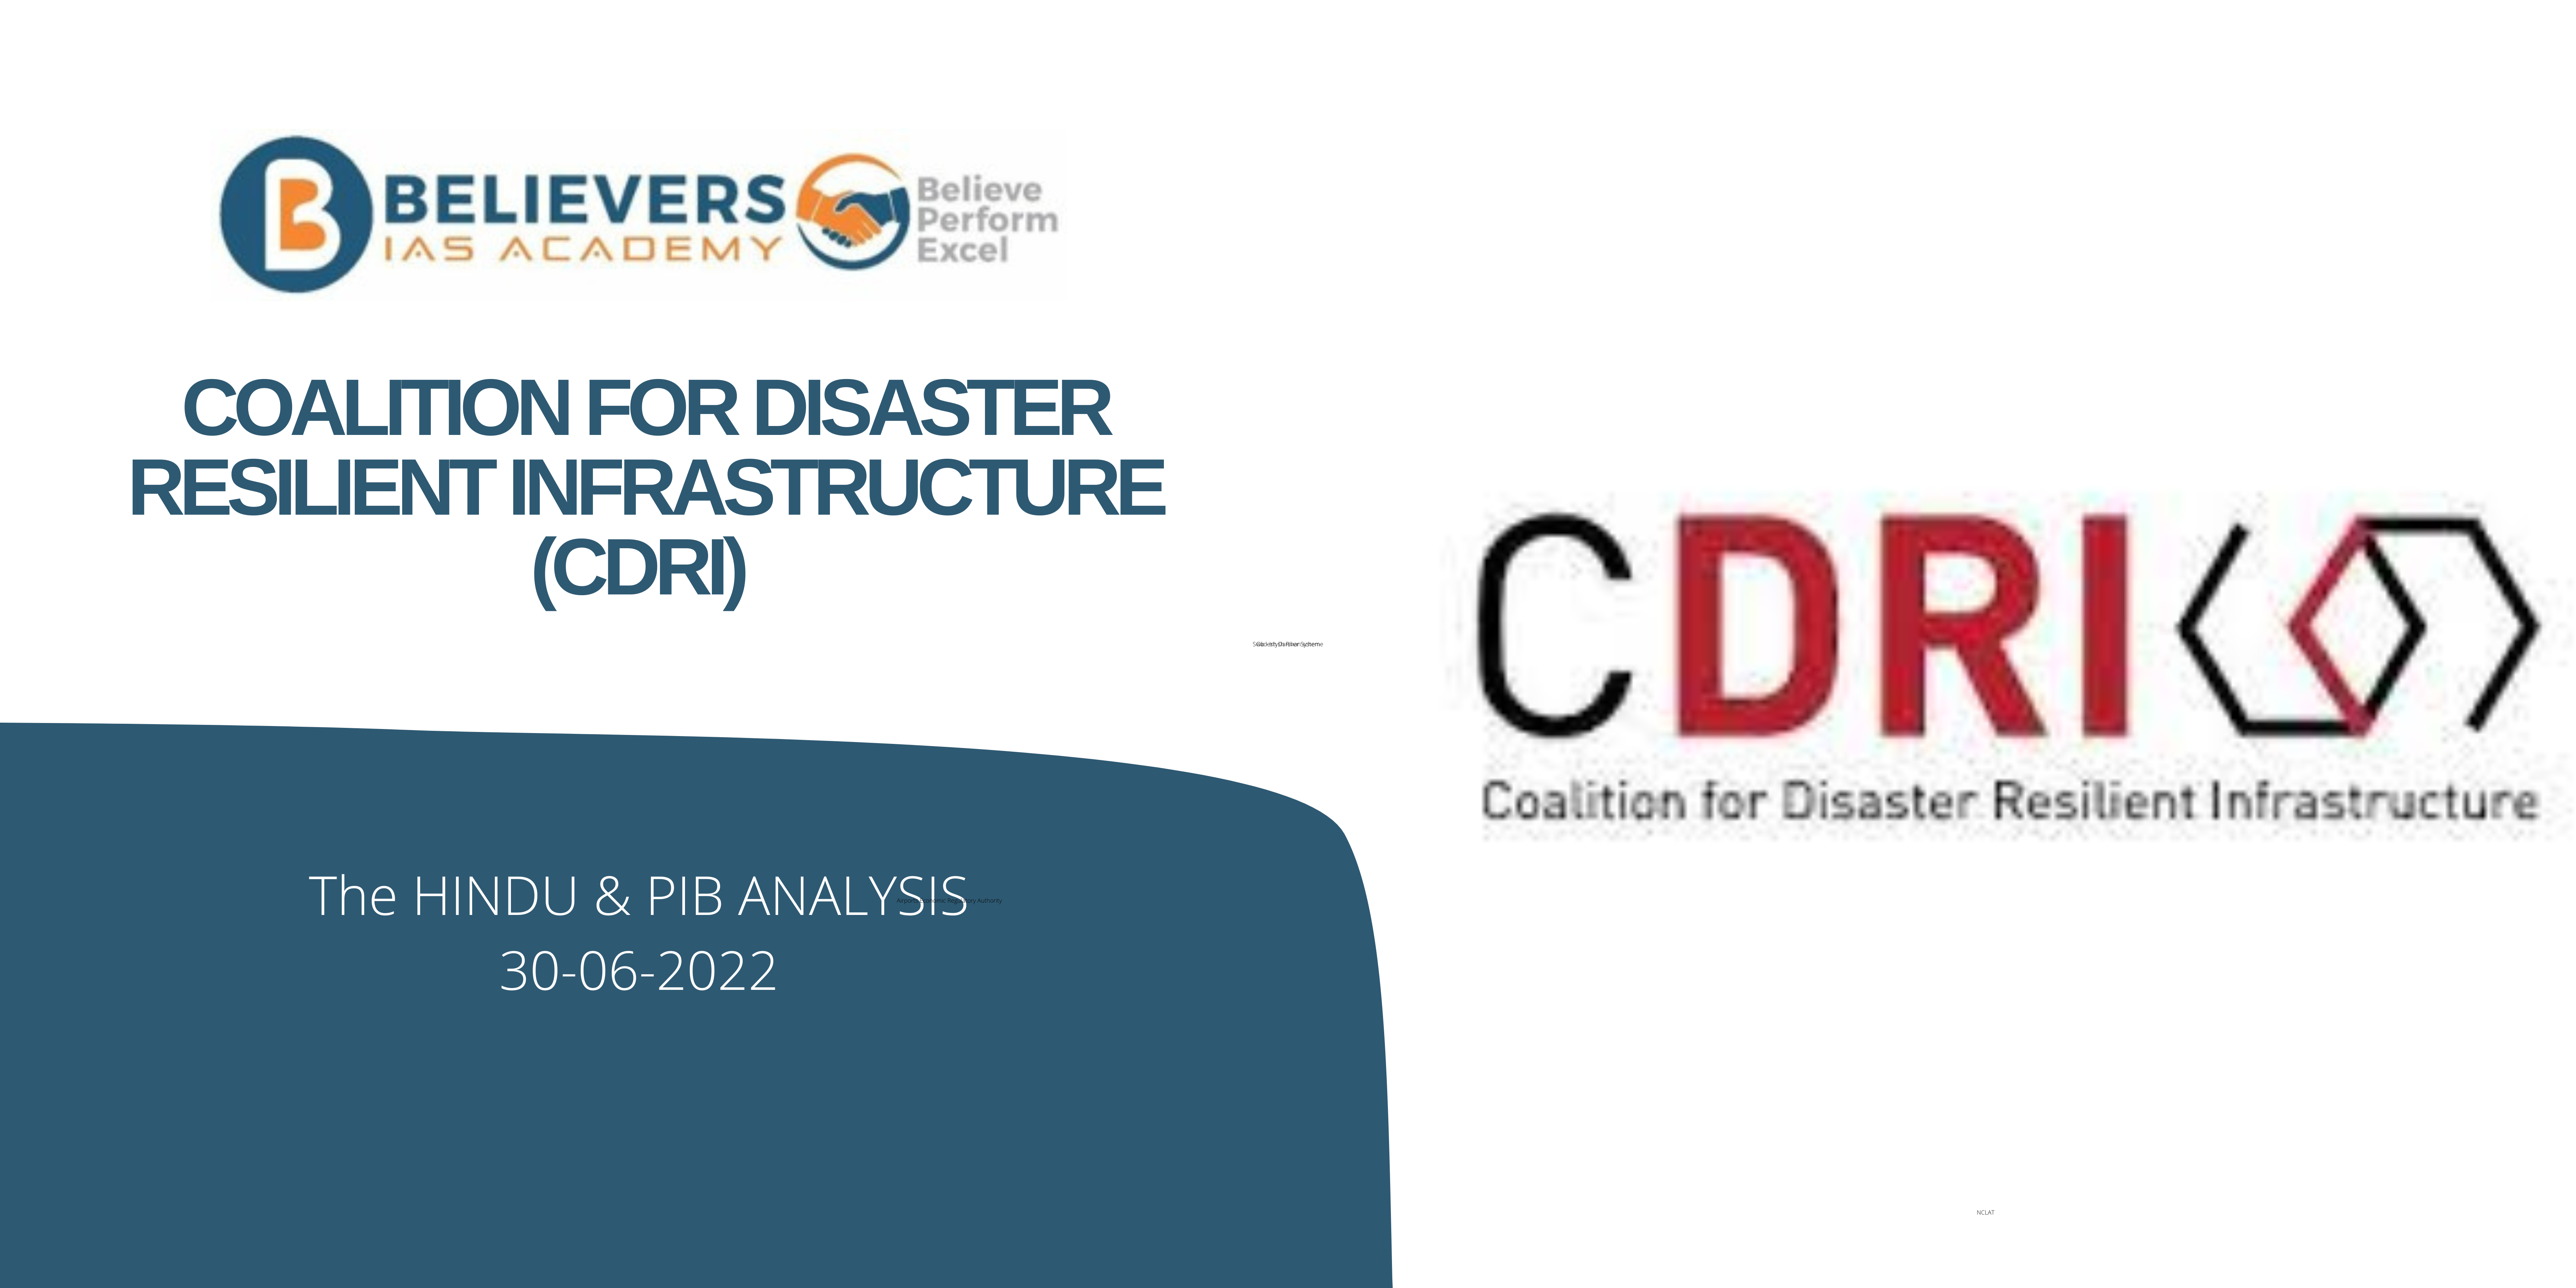 Civil services Current affairs - Coalition for Disaster Resilient Infrastructure (CDRI)